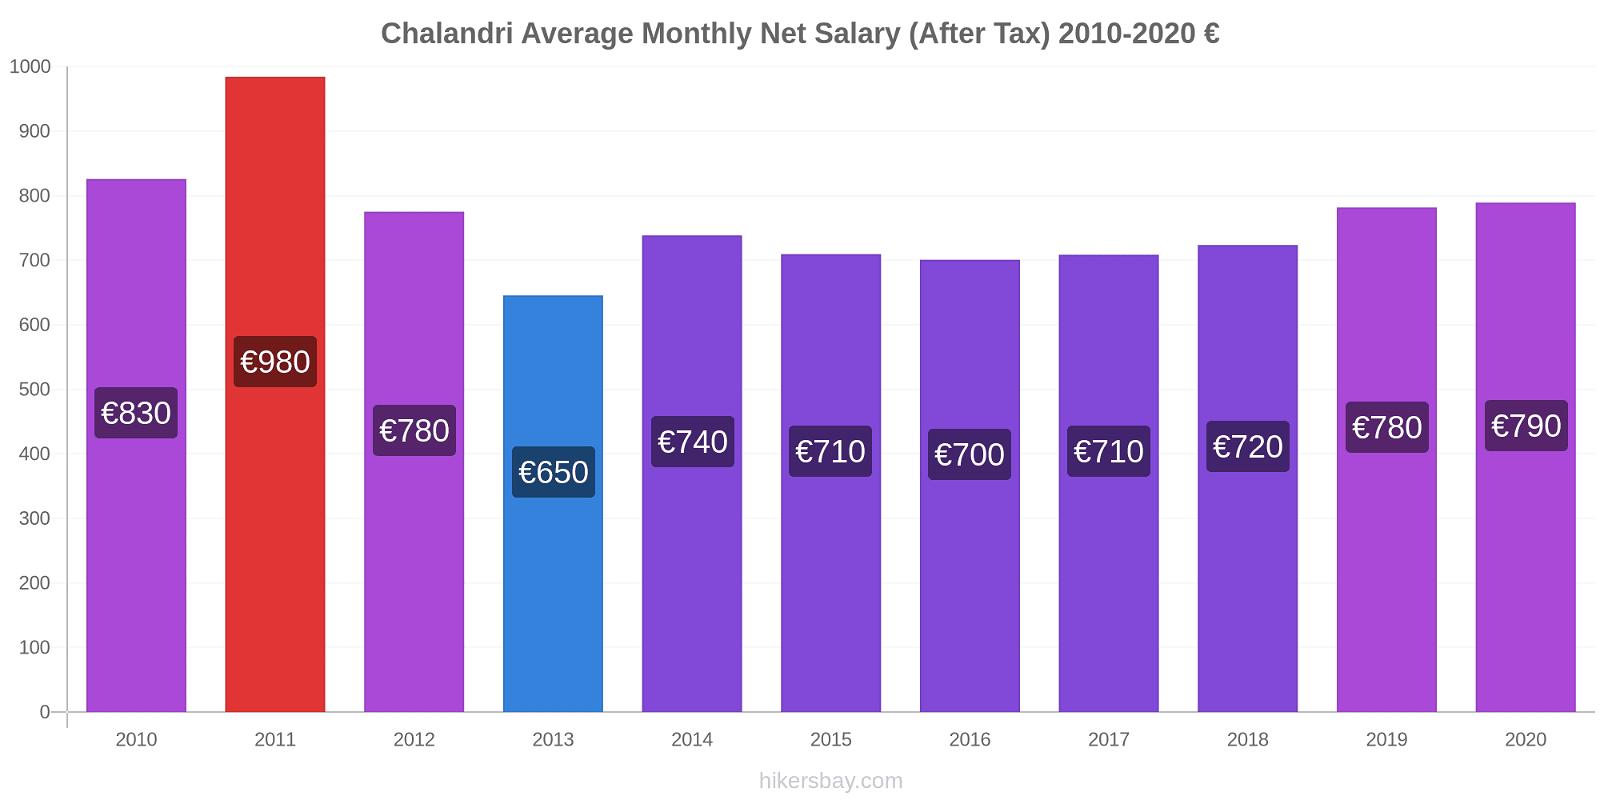 Chalandri price changes Average Monthly Net Salary (After Tax) hikersbay.com